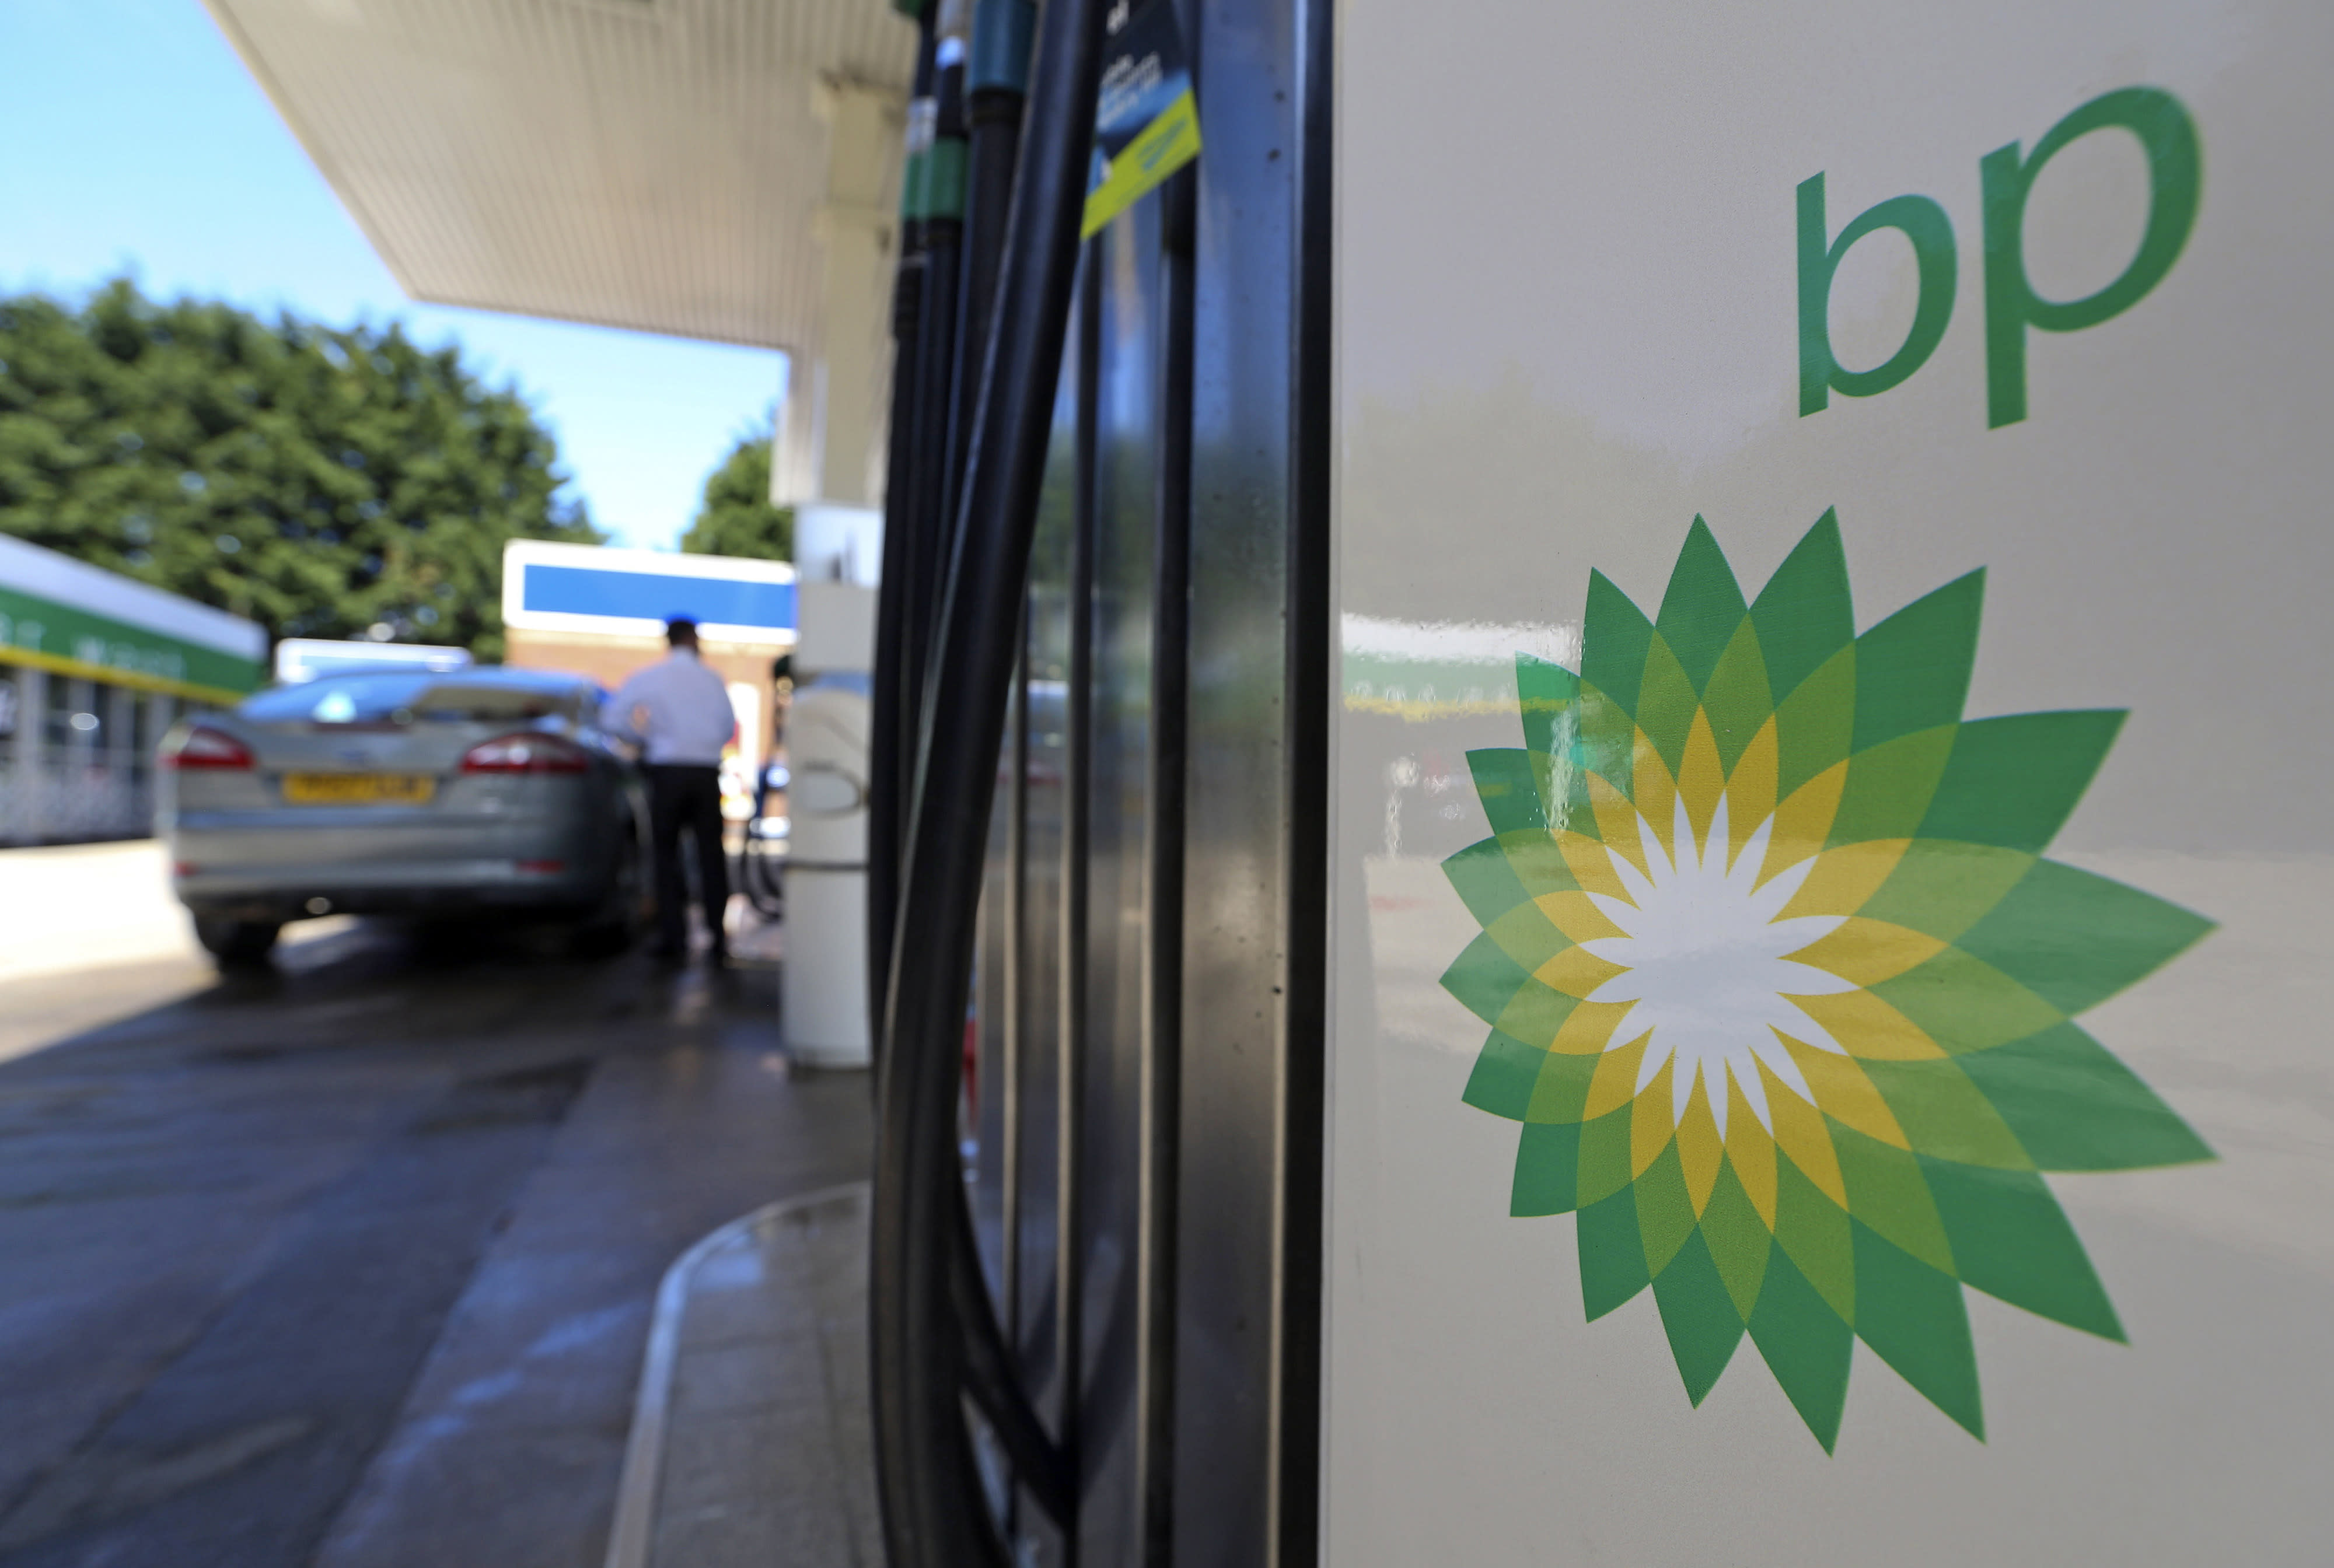 BP reports its first annual loss in a decade after ‘cruel’ year